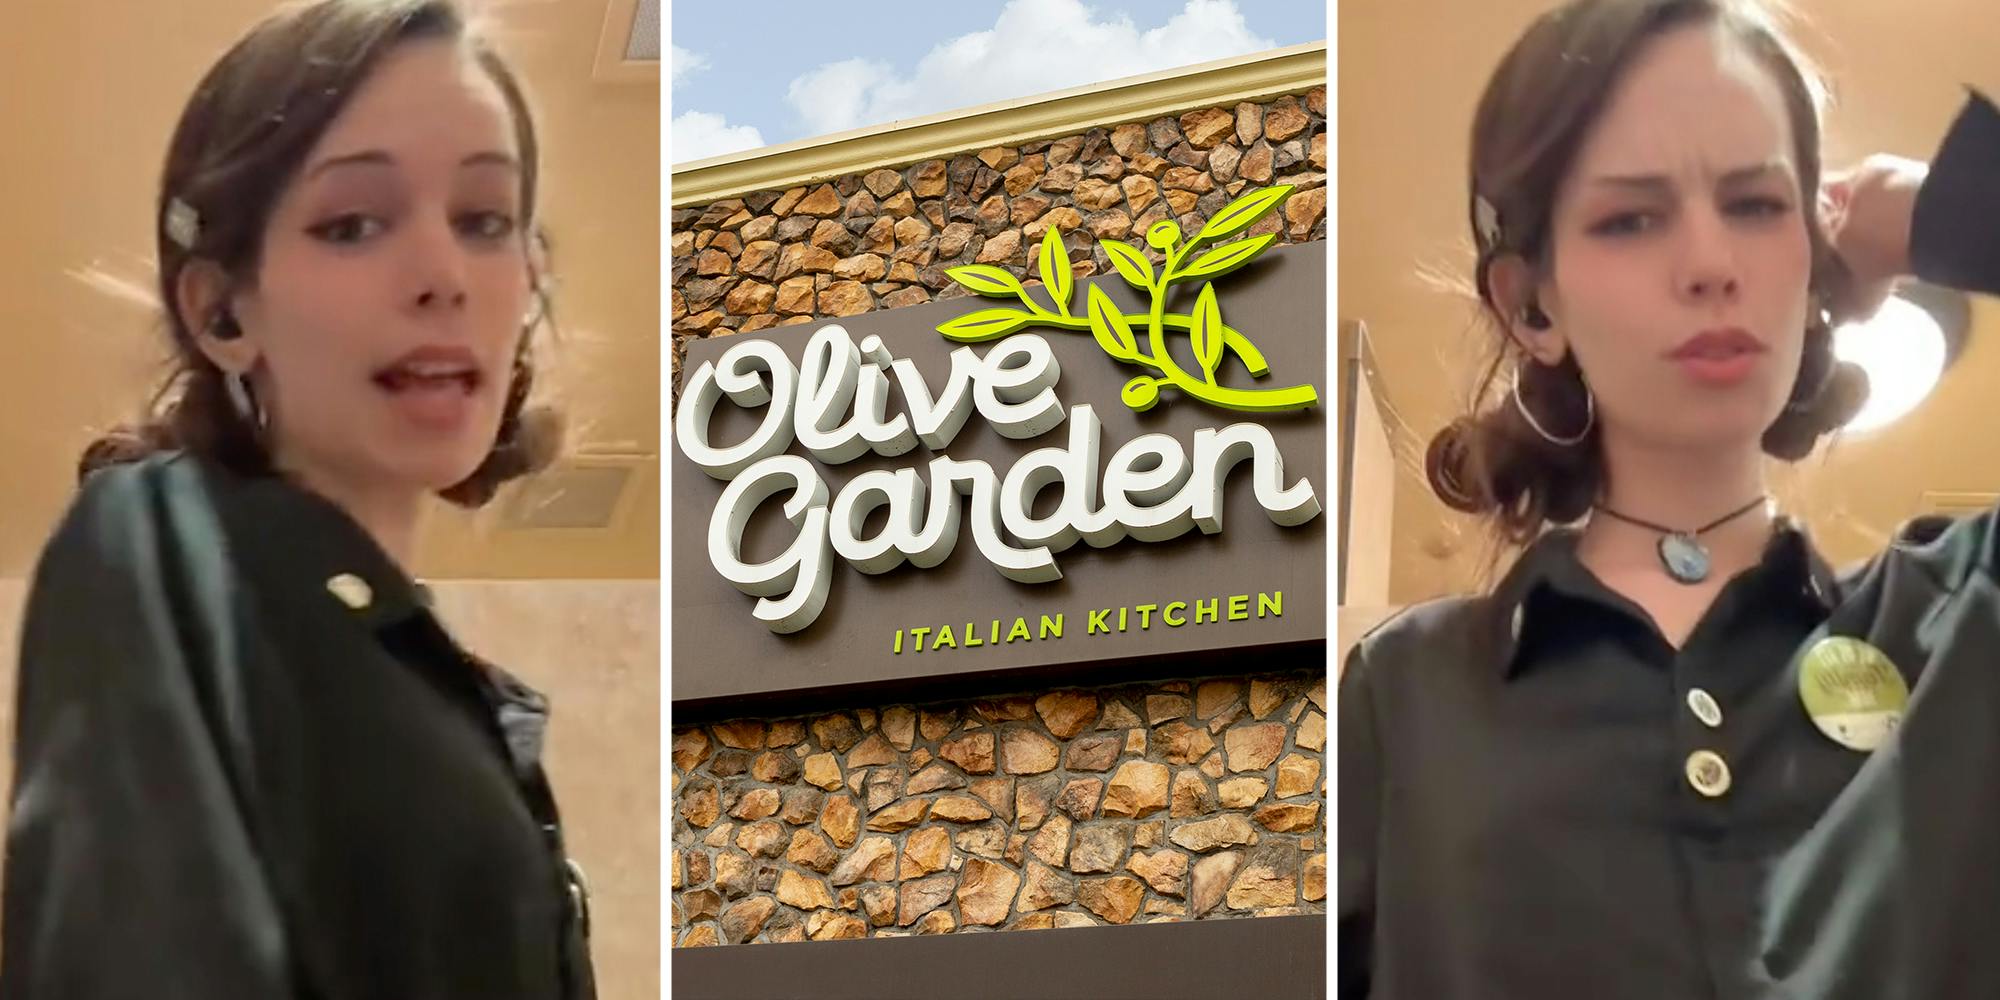 ‘And it’s the smallest dish you’ve ever seen’: Olive Garden server tries to convince customers to spend an extra $6 on alfredo sauce with breadsticks